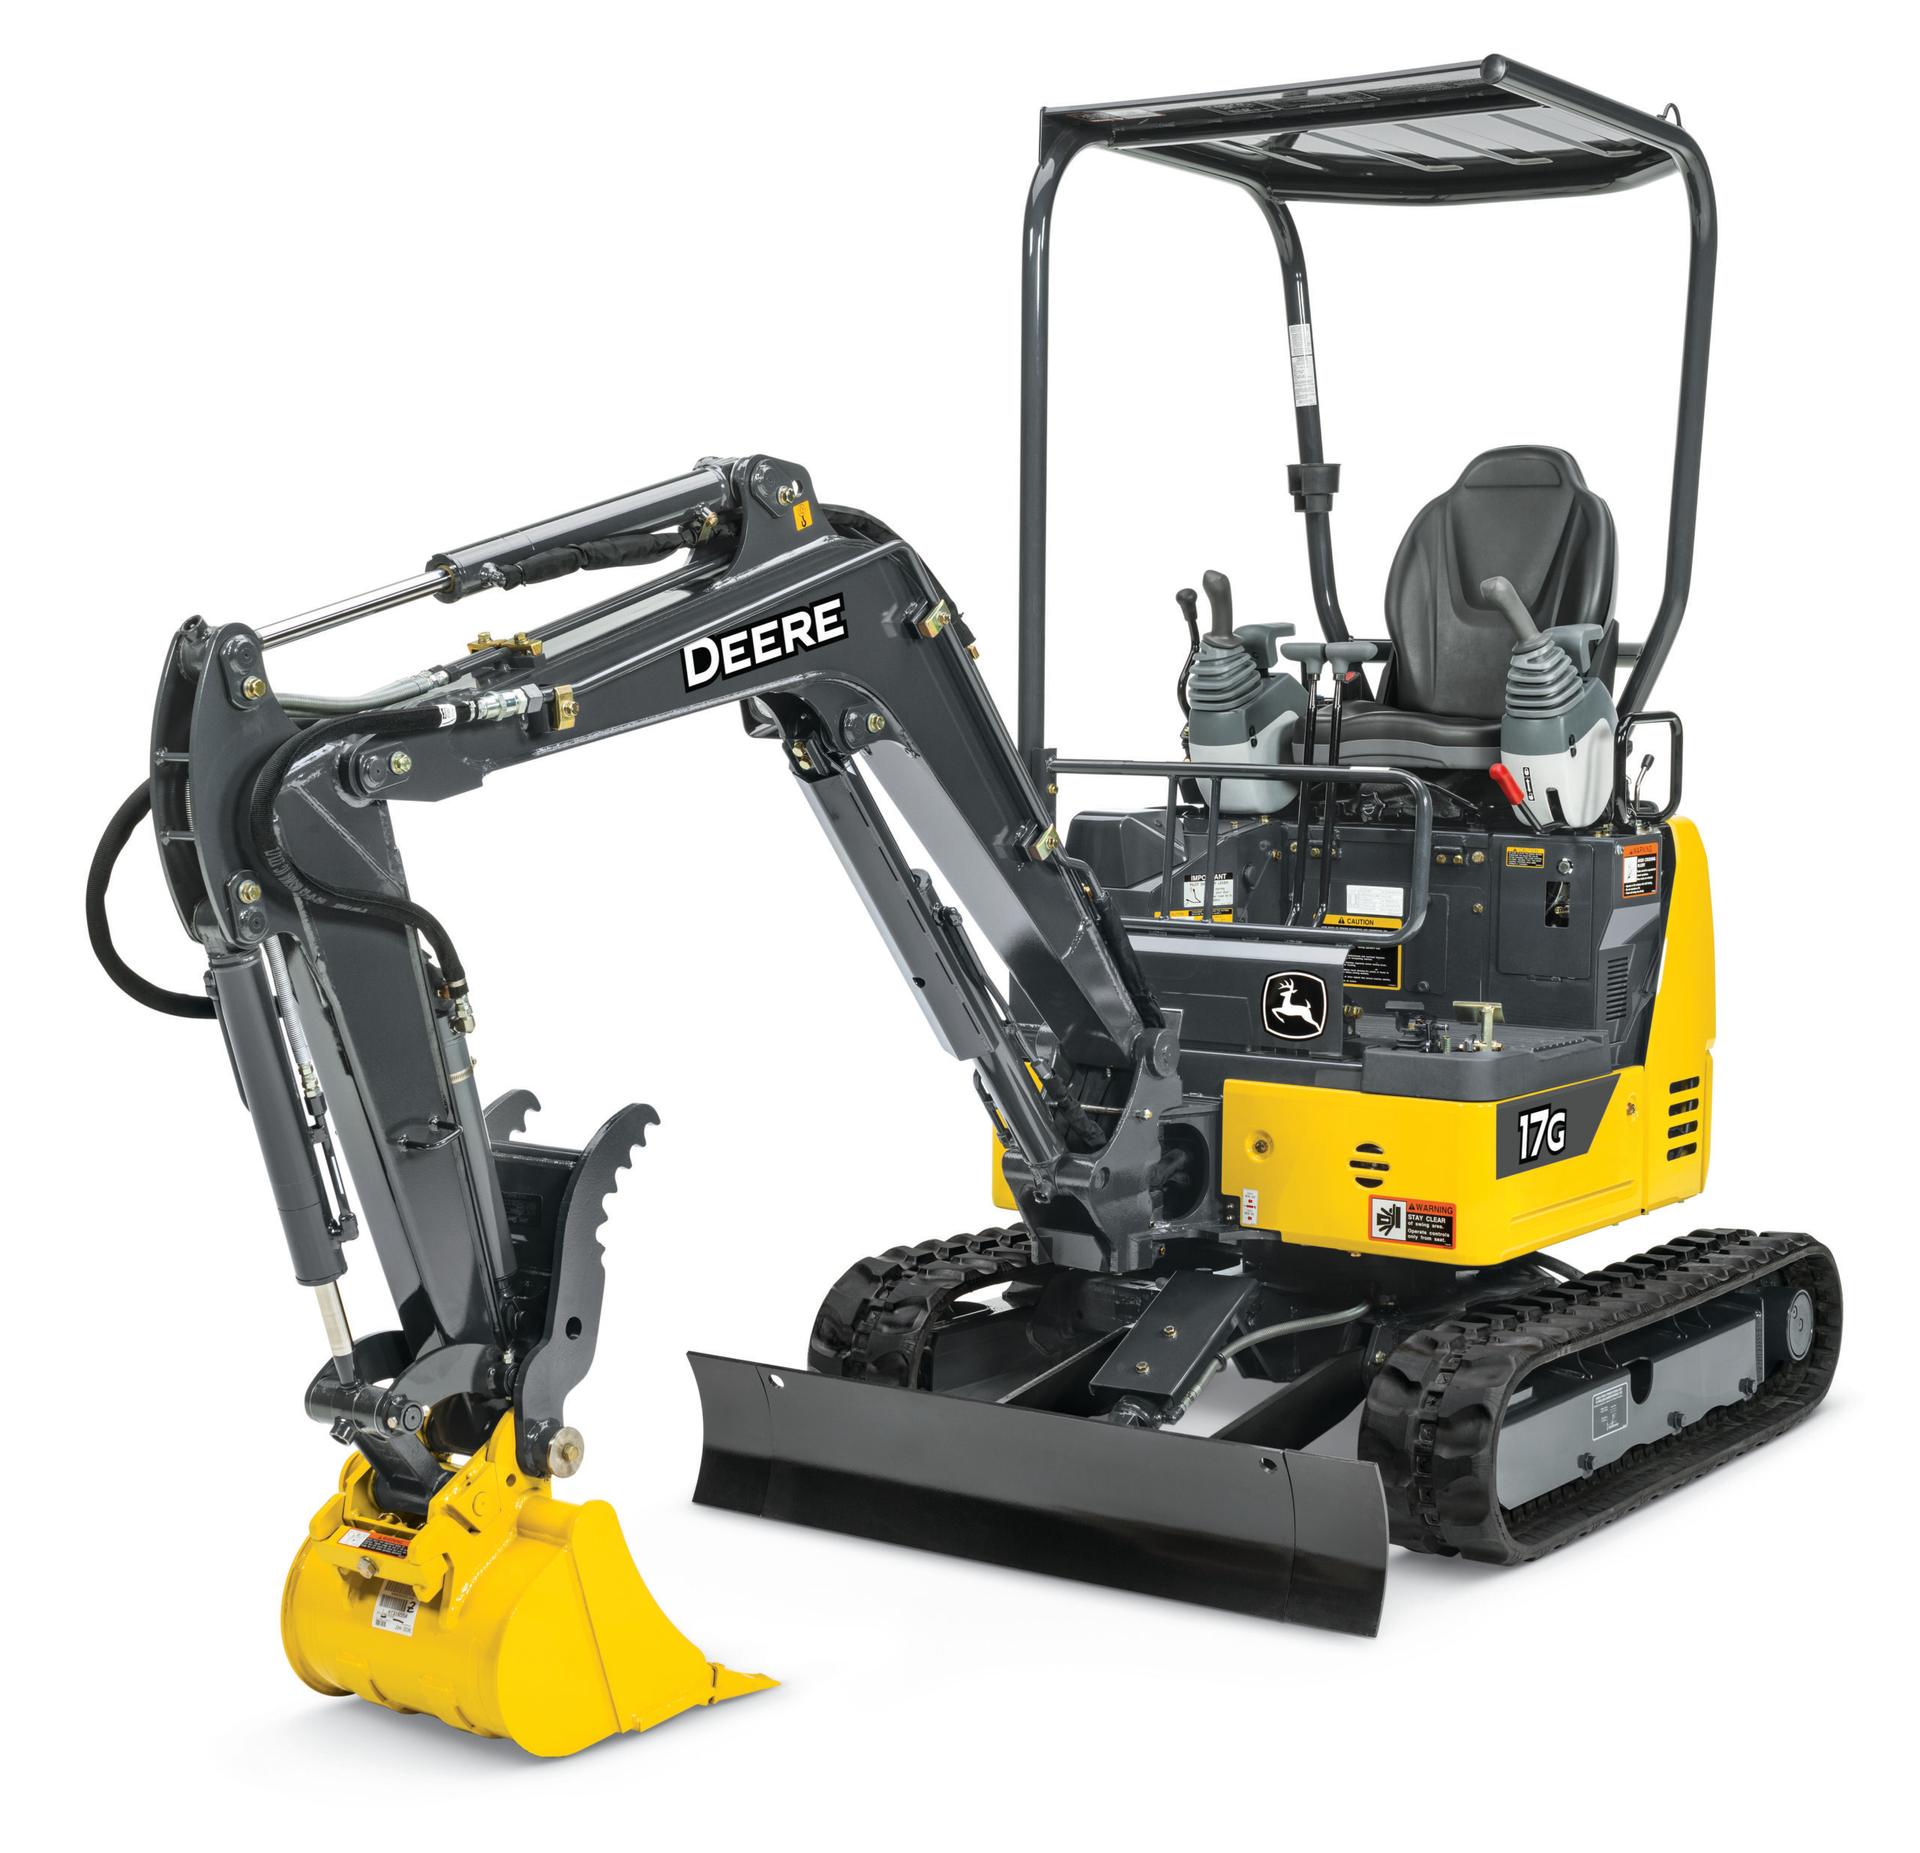 17G Compact Excavator - Wade Incorporated